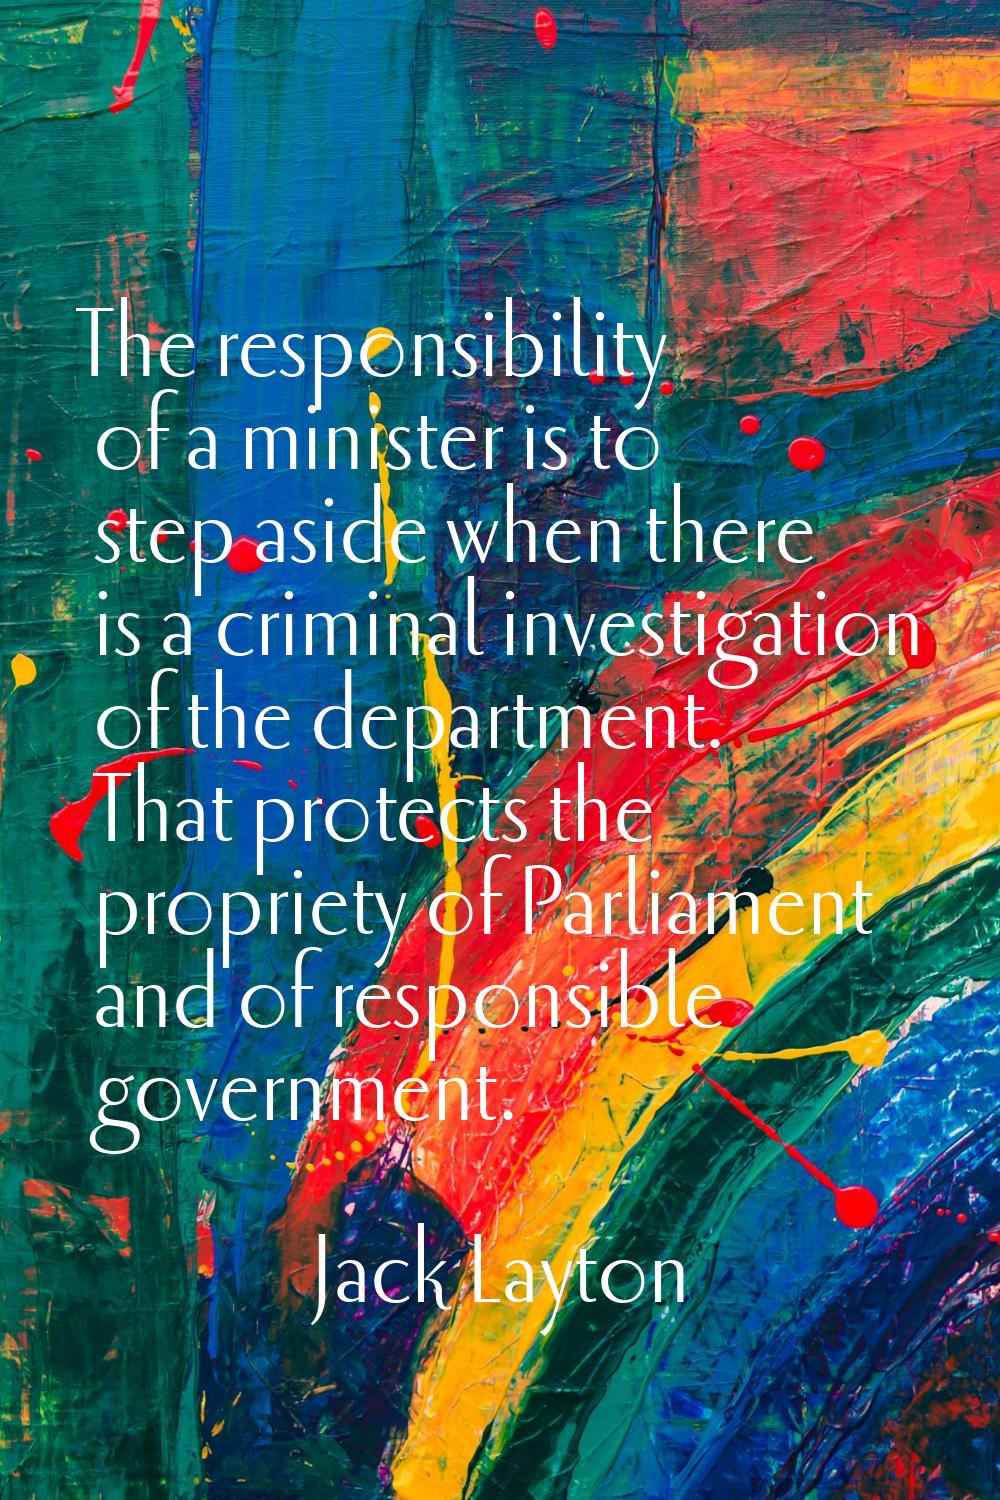 The responsibility of a minister is to step aside when there is a criminal investigation of the dep